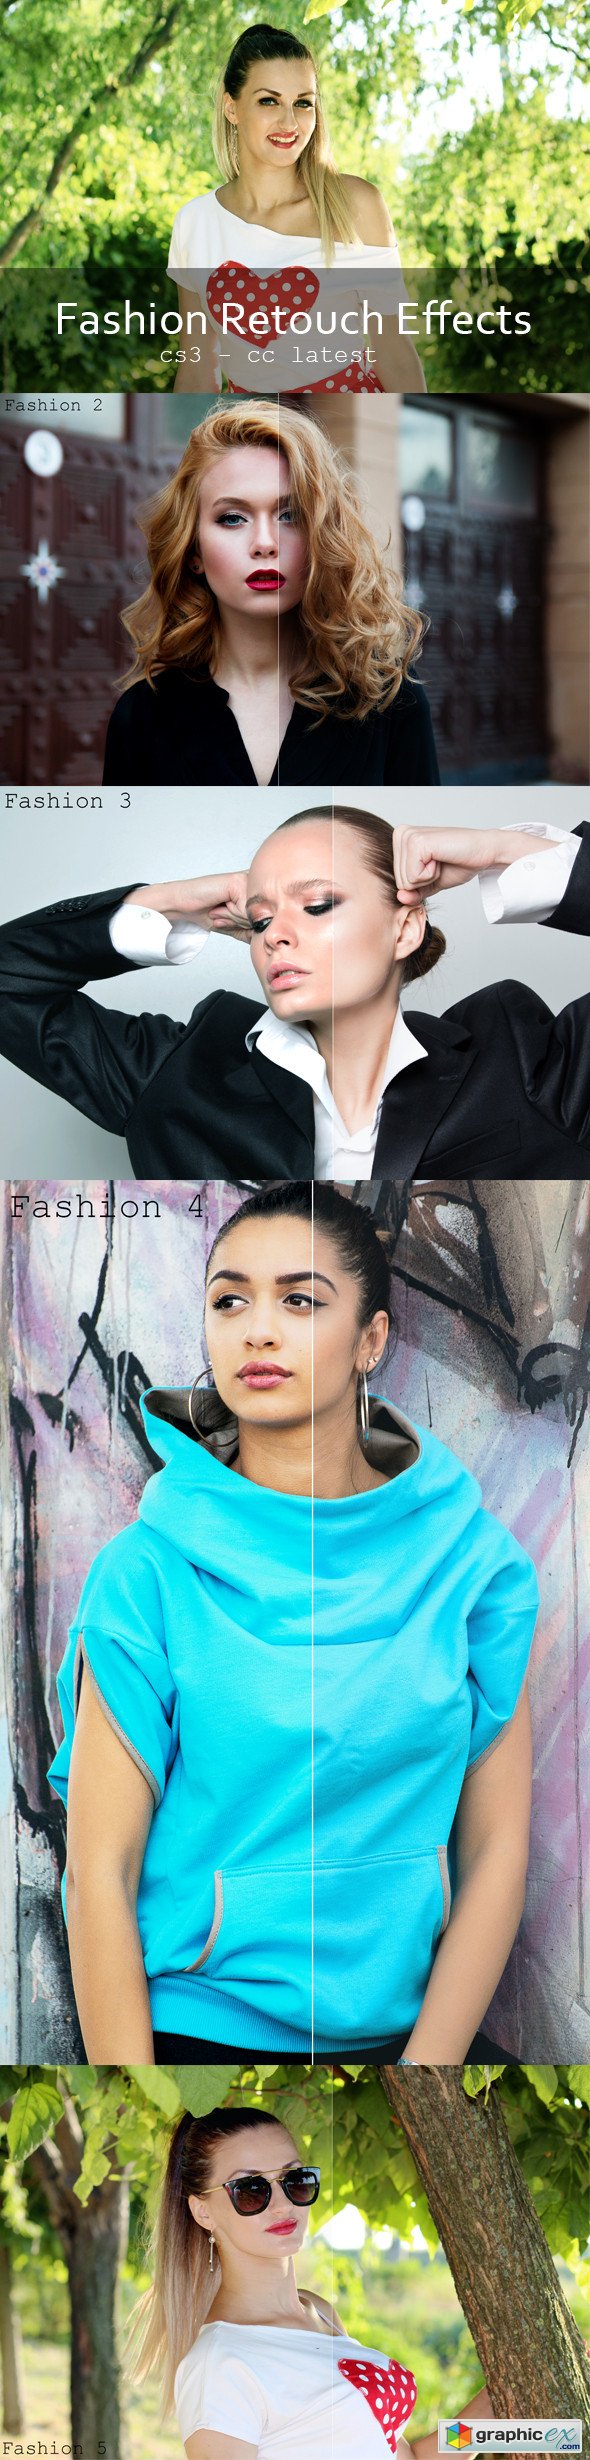 Fashion Retouch Effects